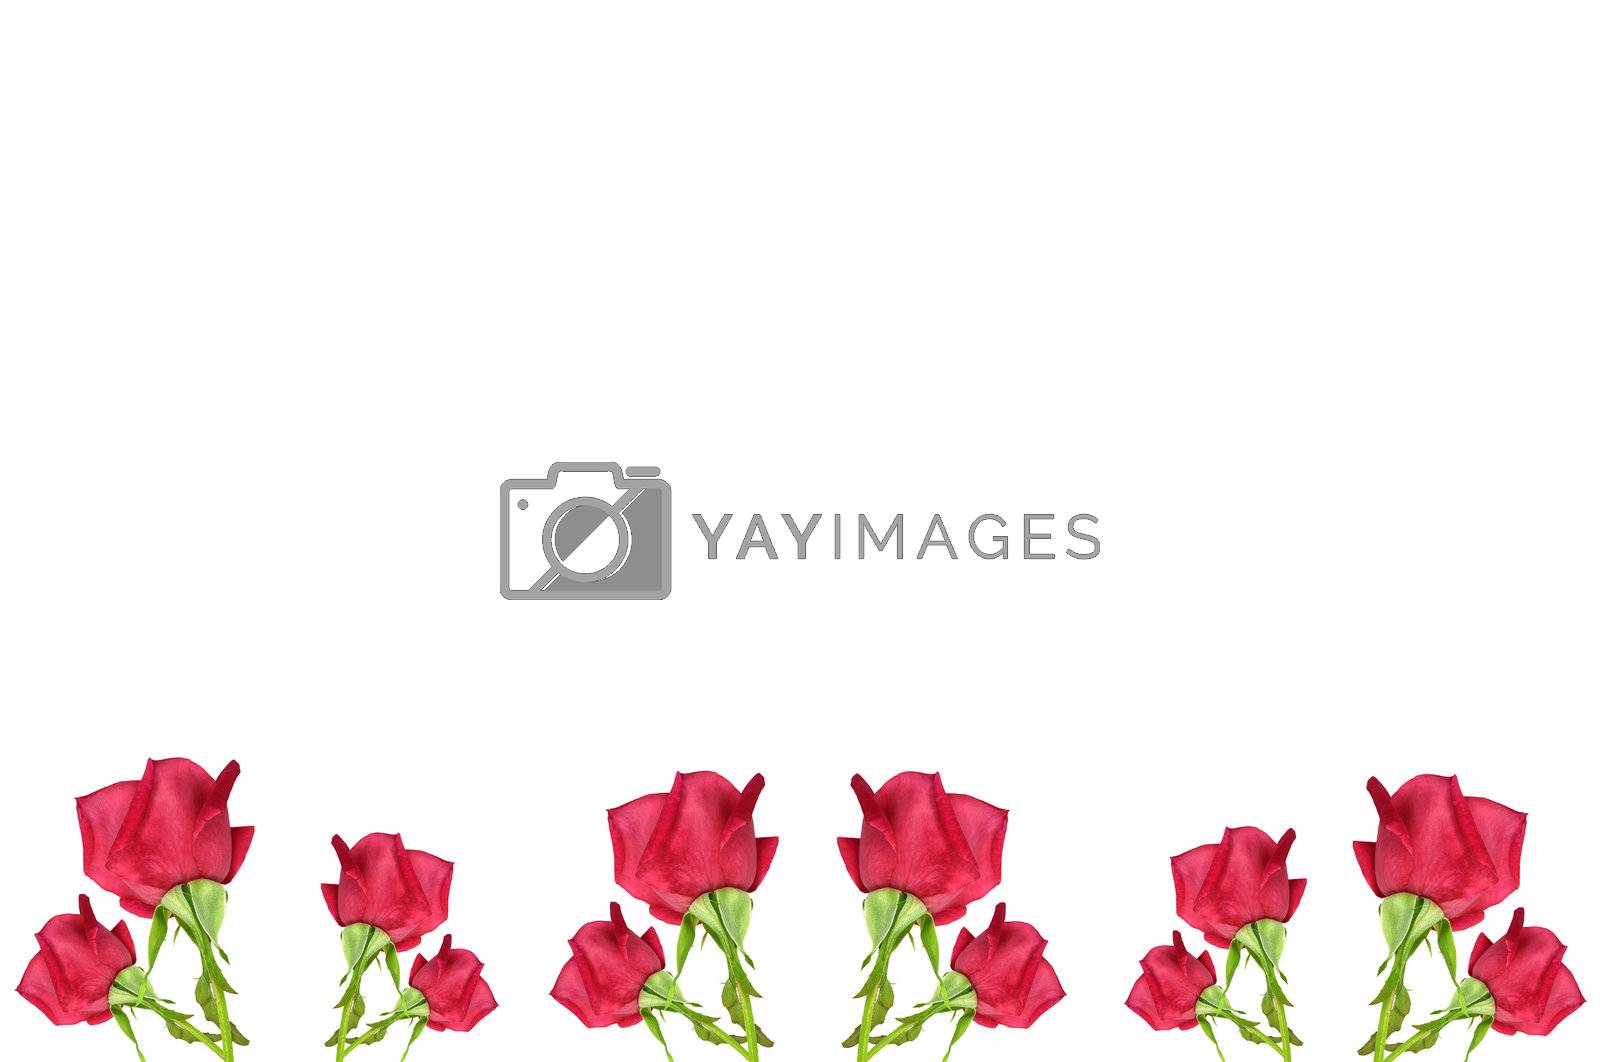 Red Rose Flower Border Royalty Free Stock Image Stock Photos Royalty Free Images Vectors Footage Yayimages